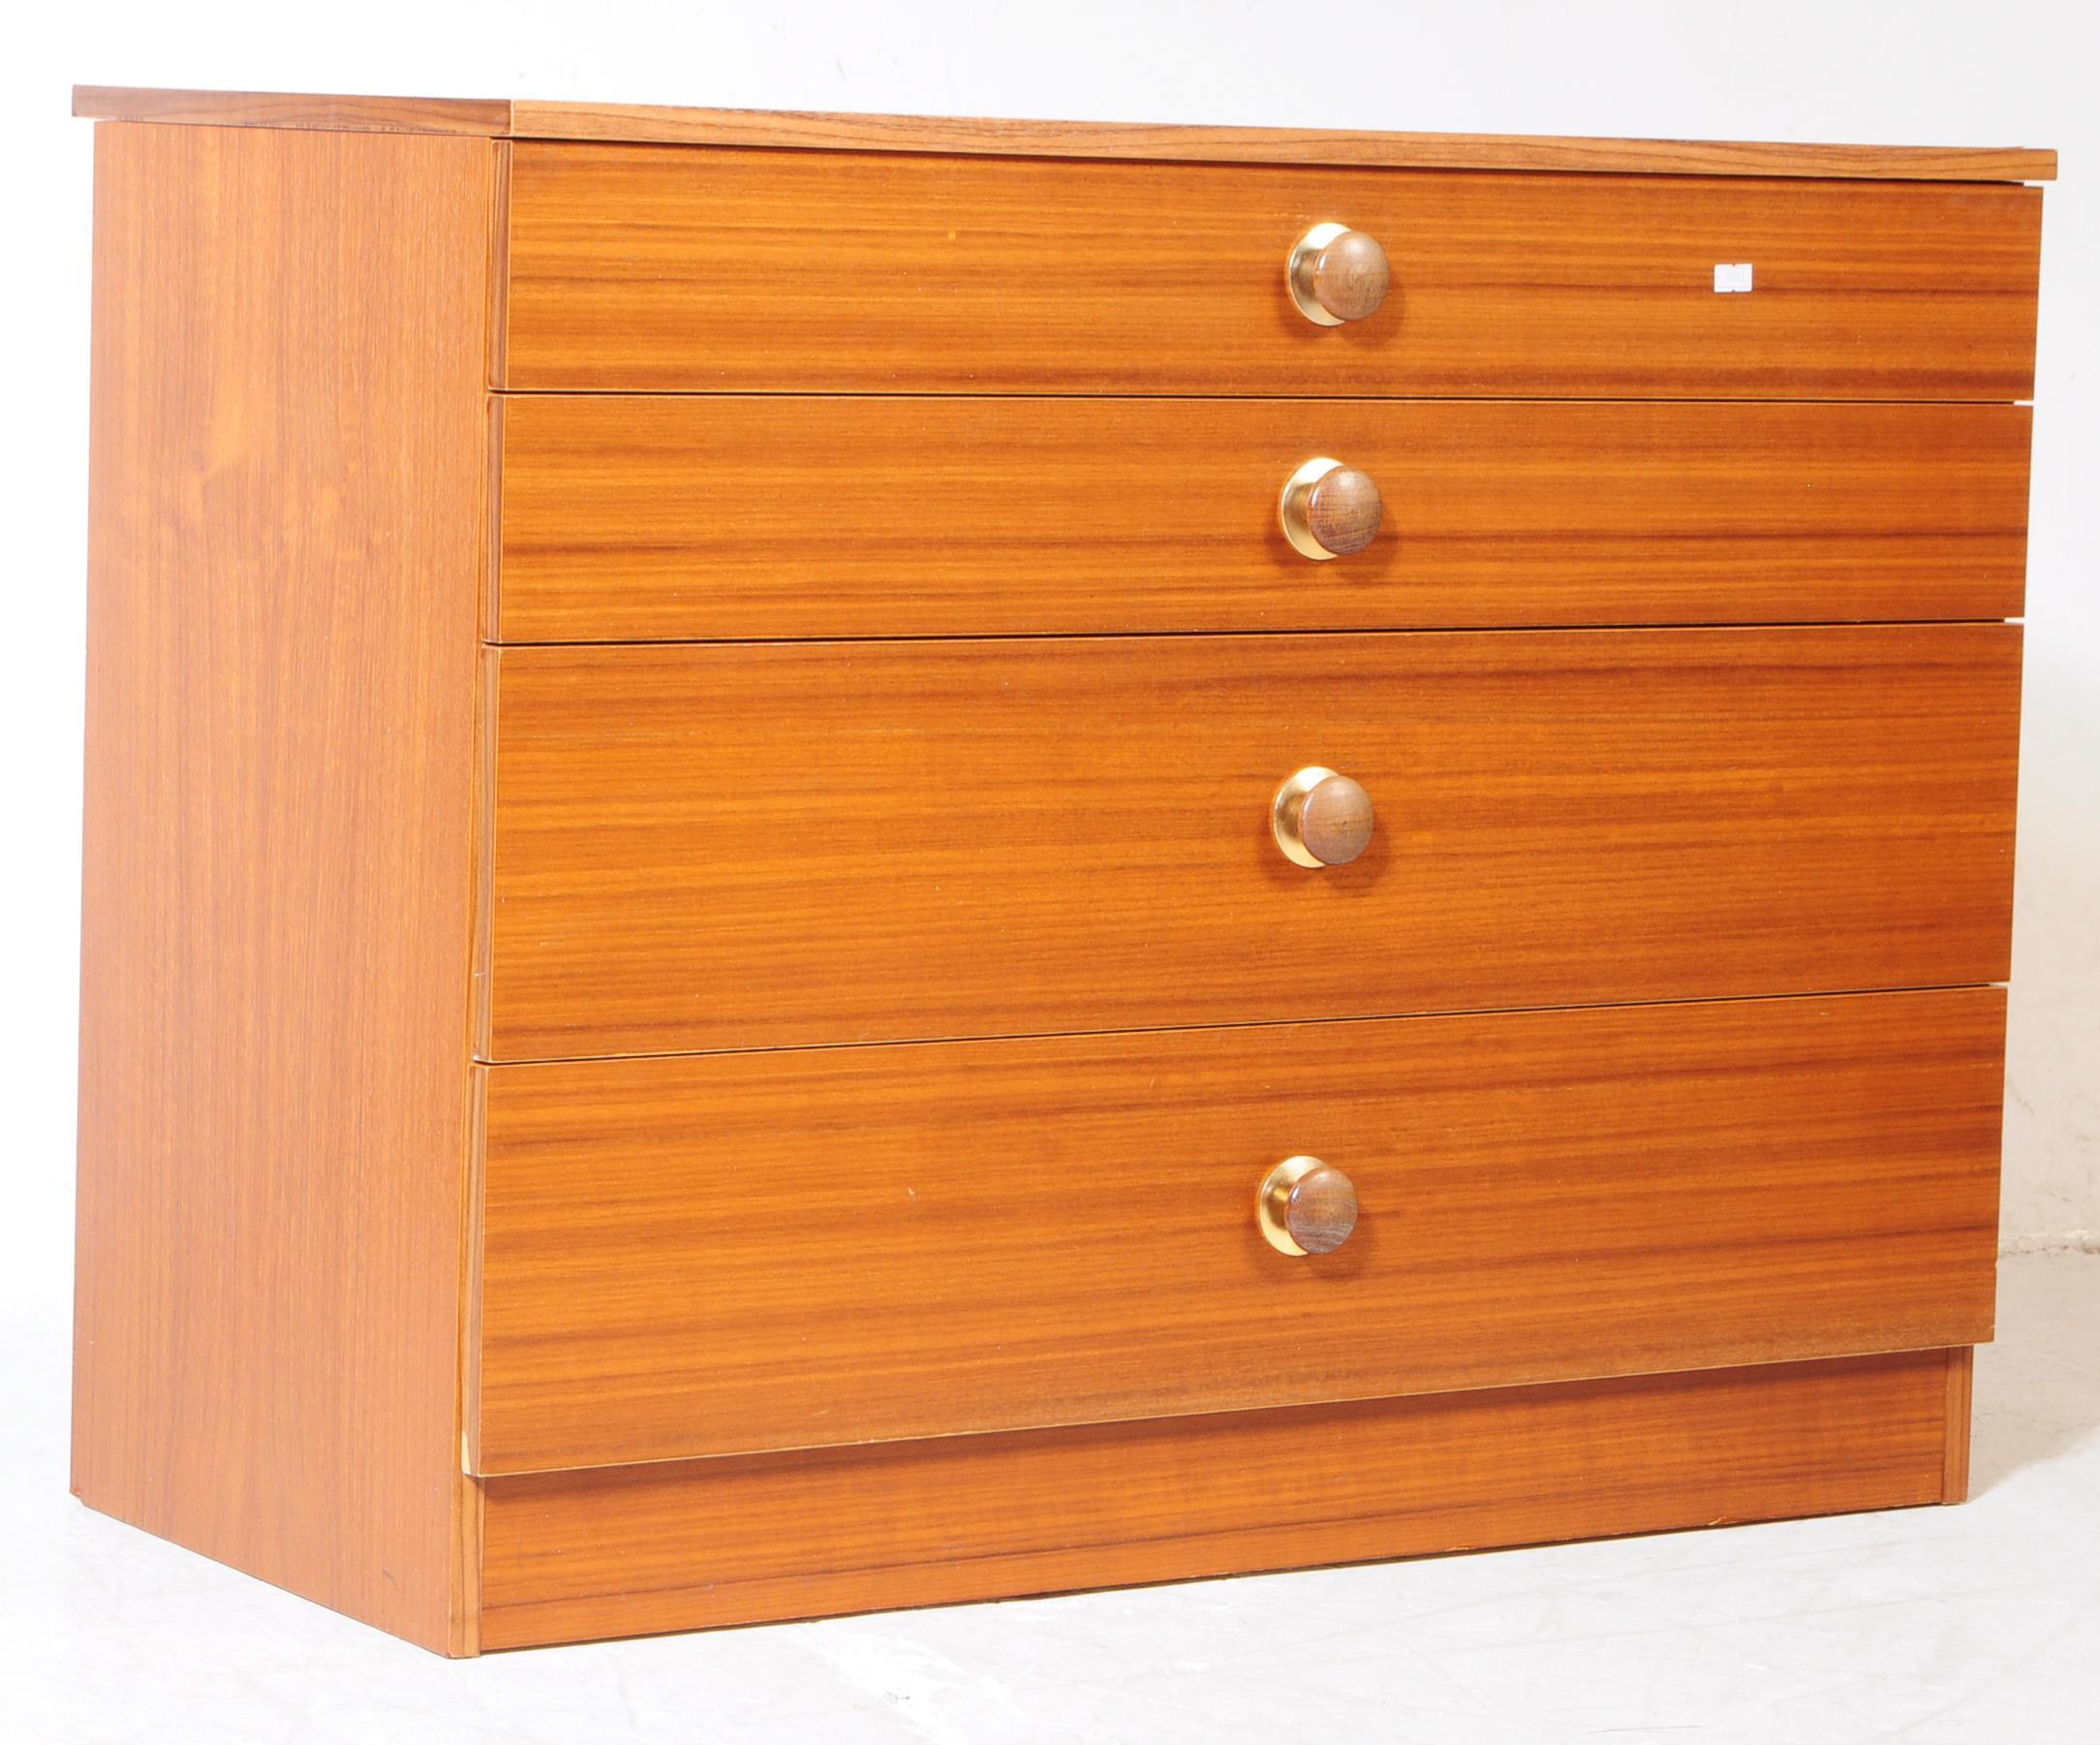 AVALON FURNITURE - VINTAGE 20TH CENTURY CHEST OF DRAWERS